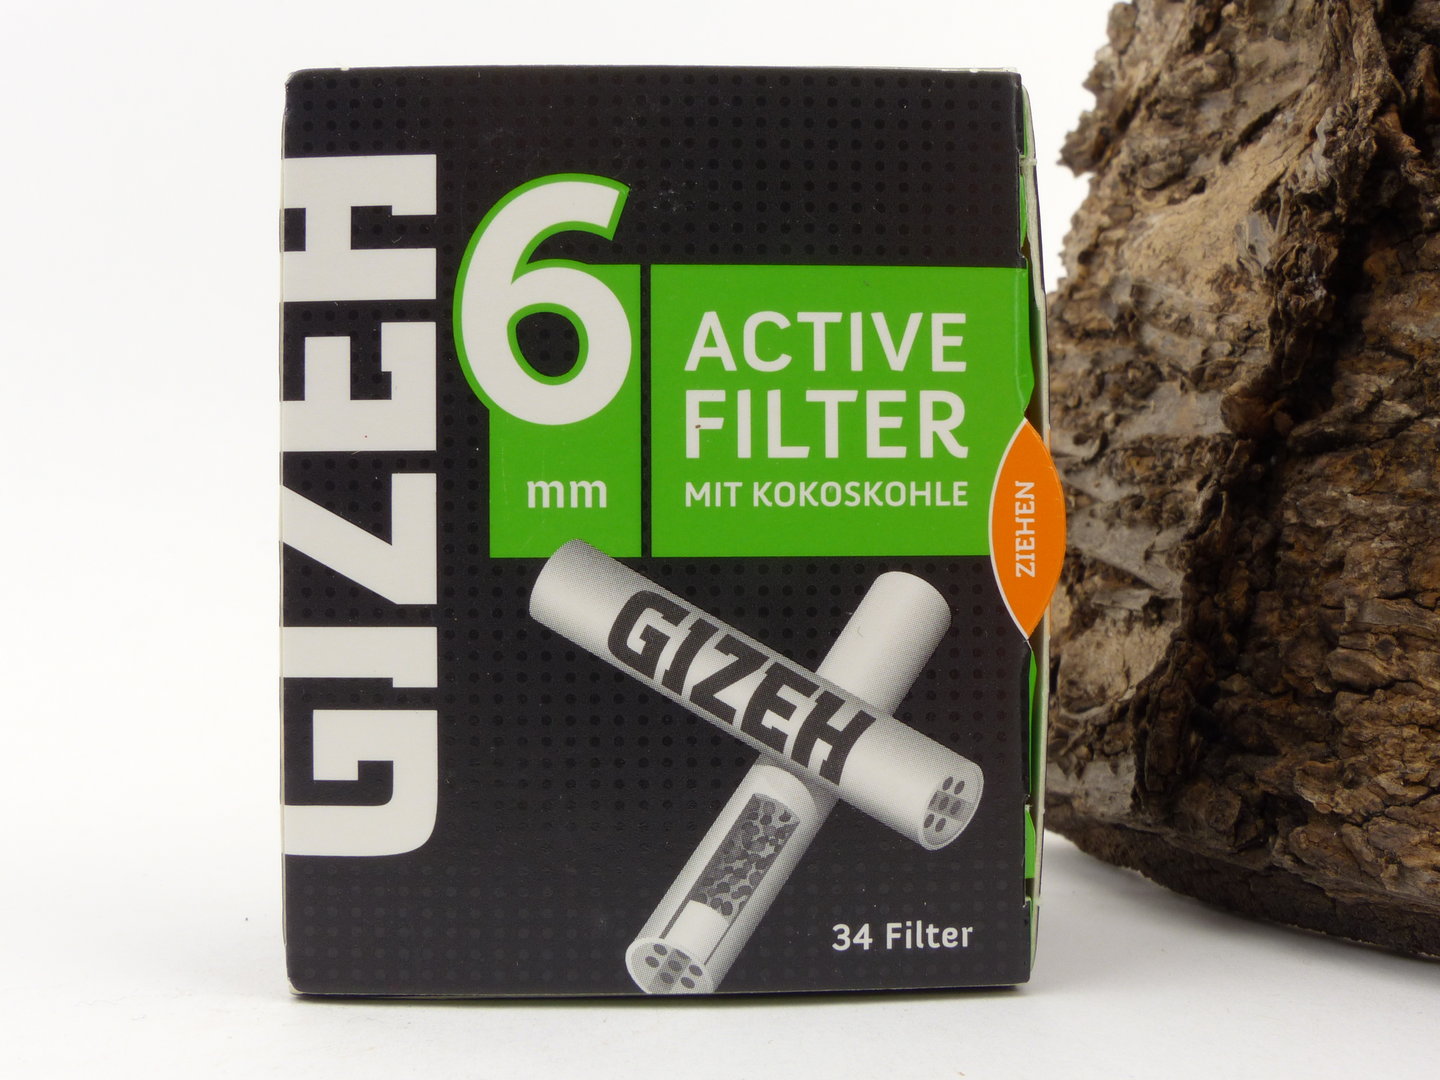 Brand New Gizeh Slim Filter Tips Charcoal Active System 6mm Full